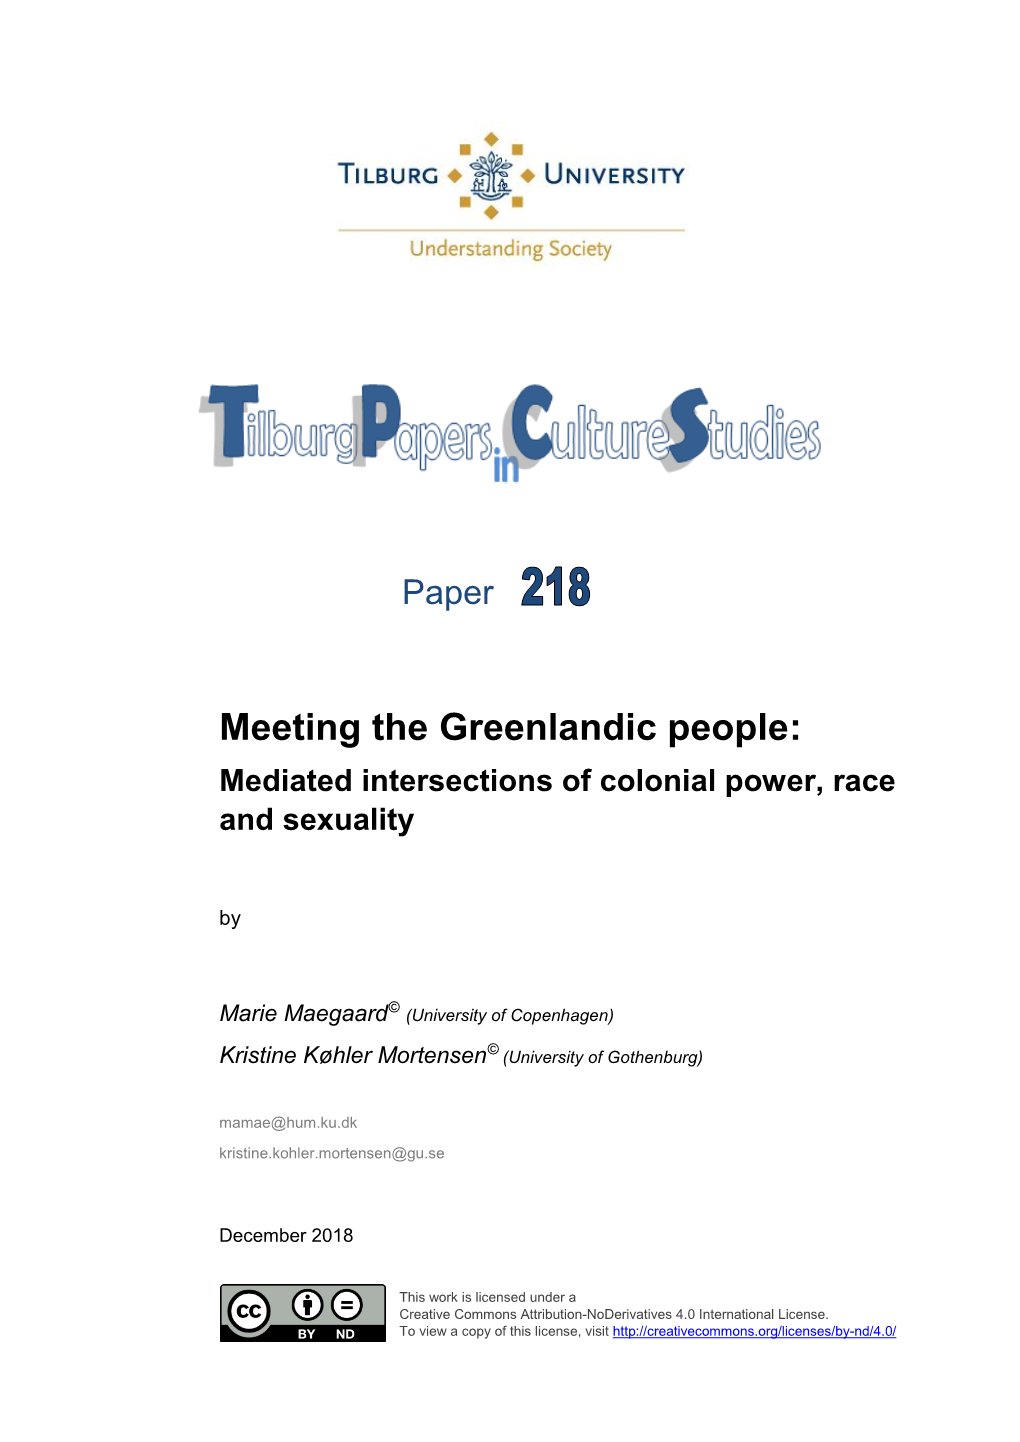 Meeting the Greenlandic People: Mediated Intersections of Colonial Power, Race and Sexuality